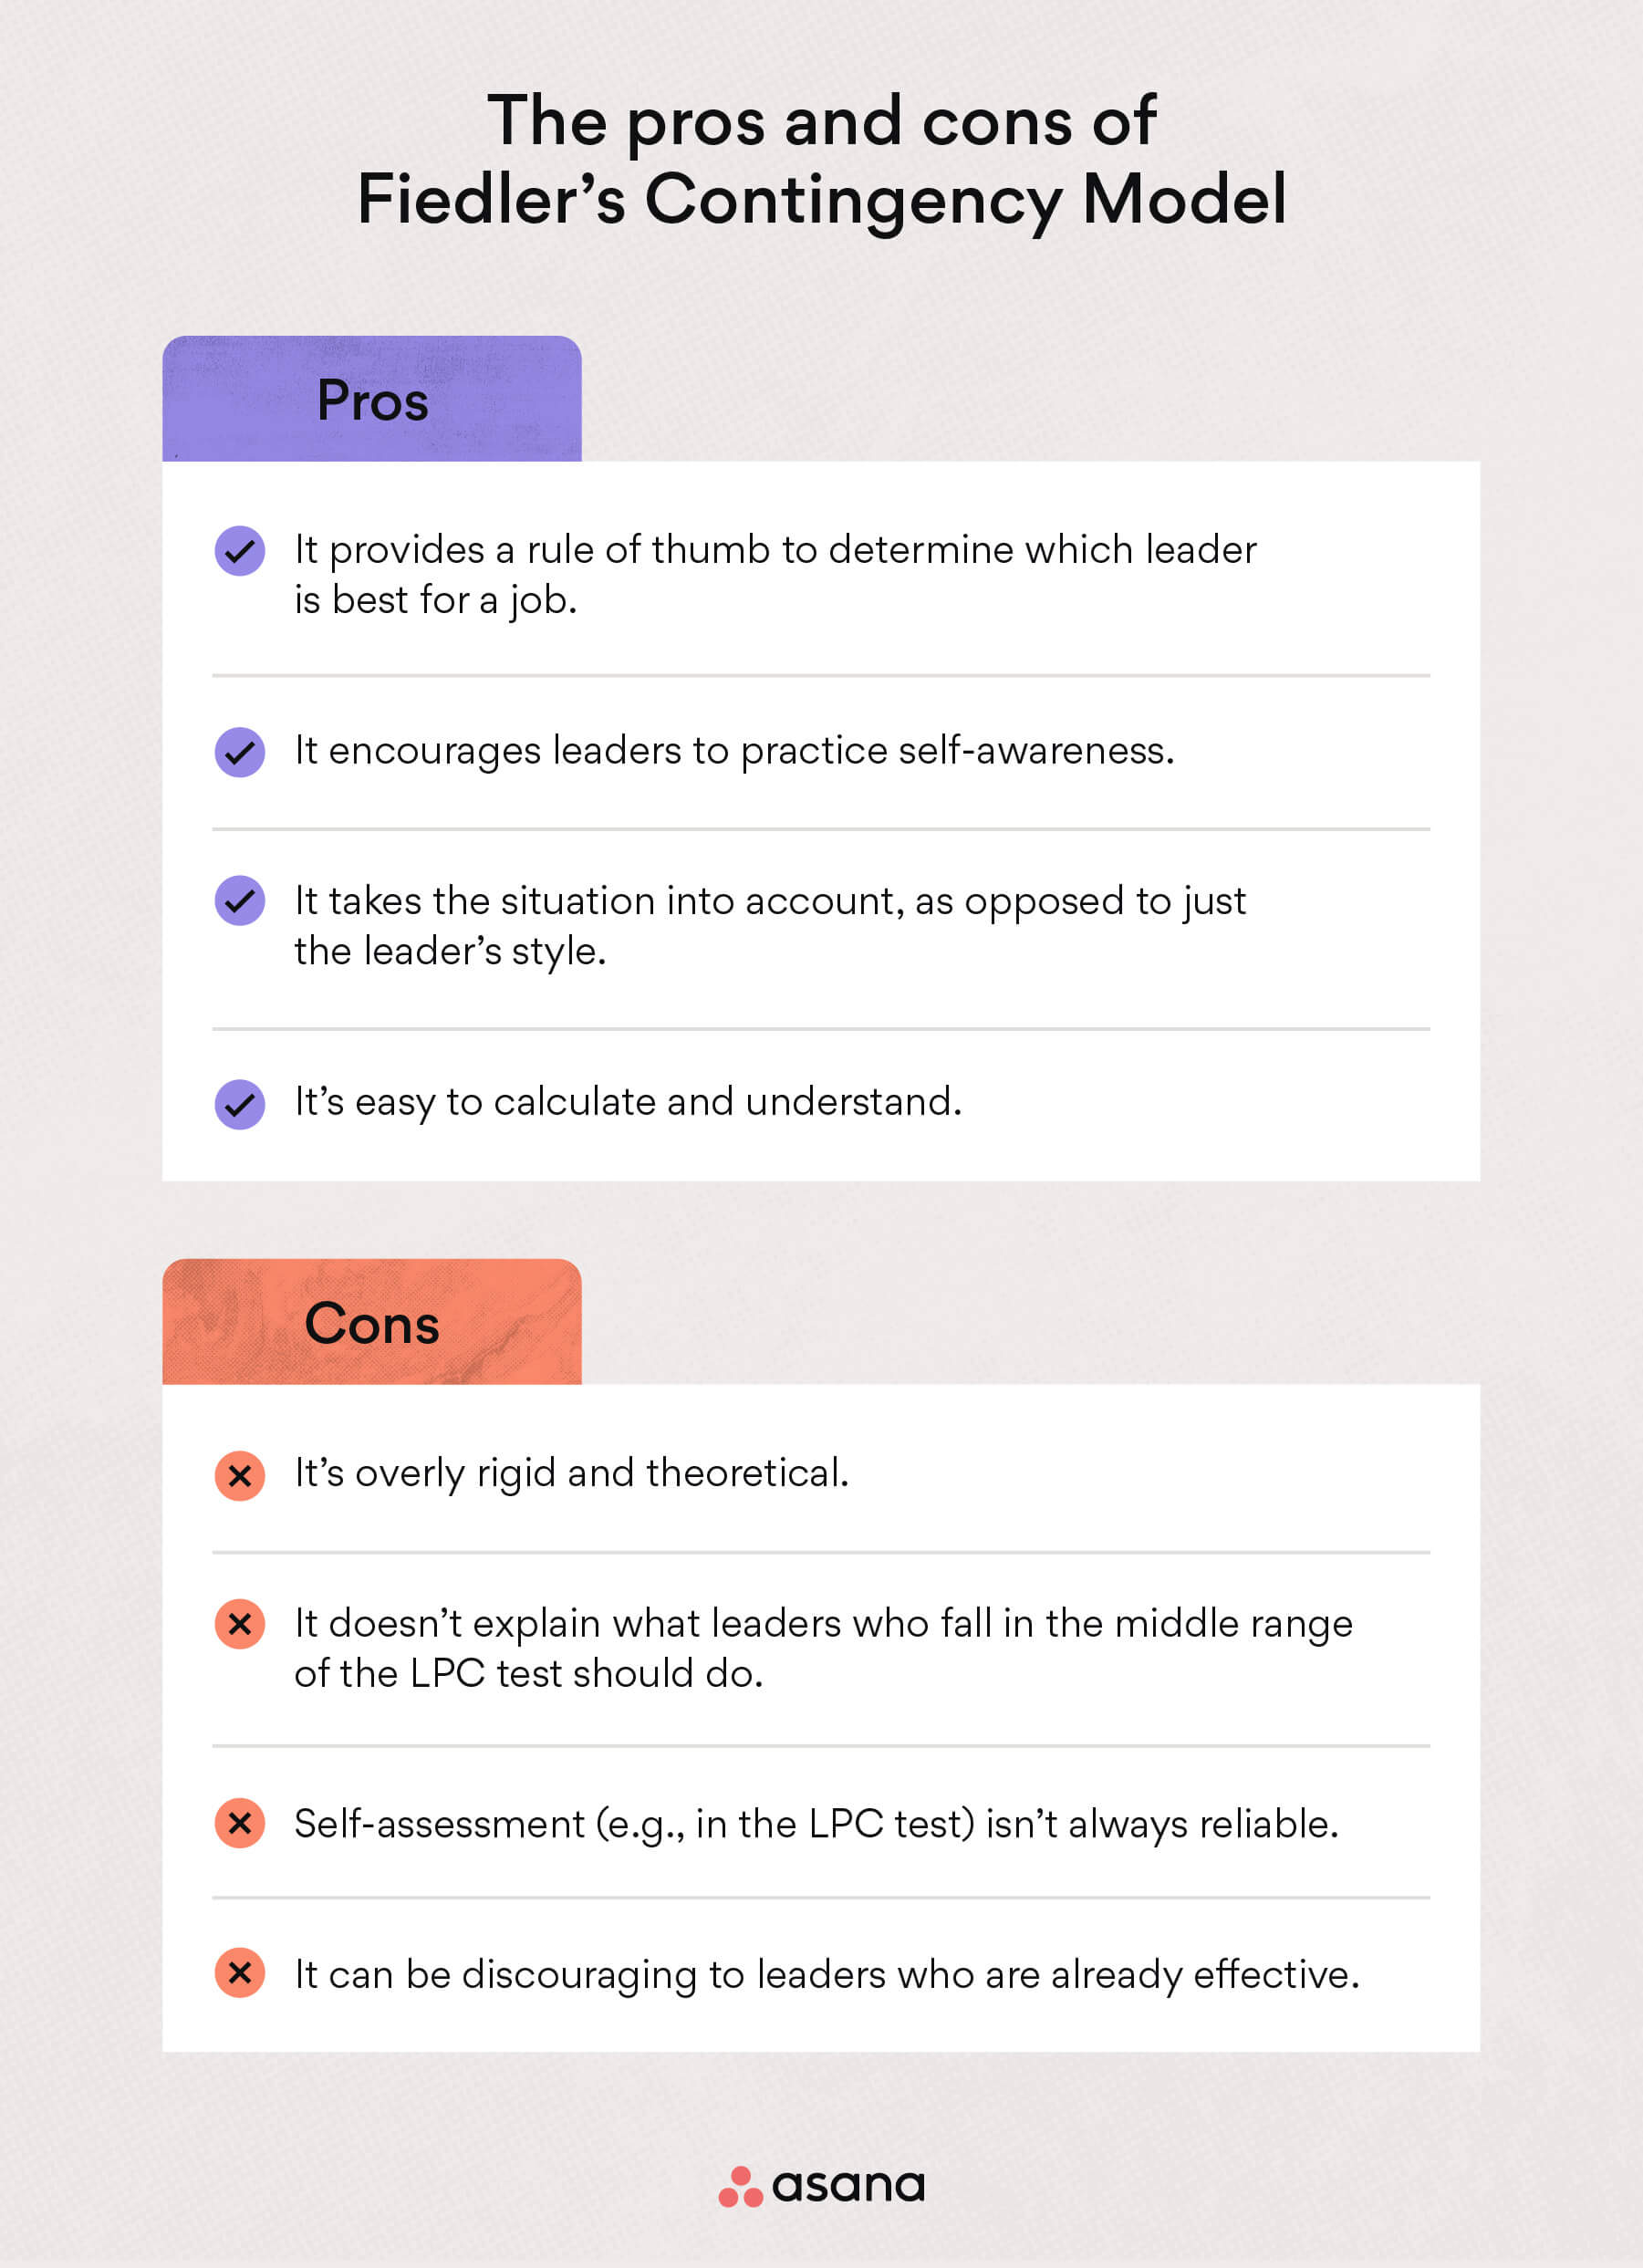 [inline illustration] Pros and cons of Fiedler's Contingency Model (infographic)